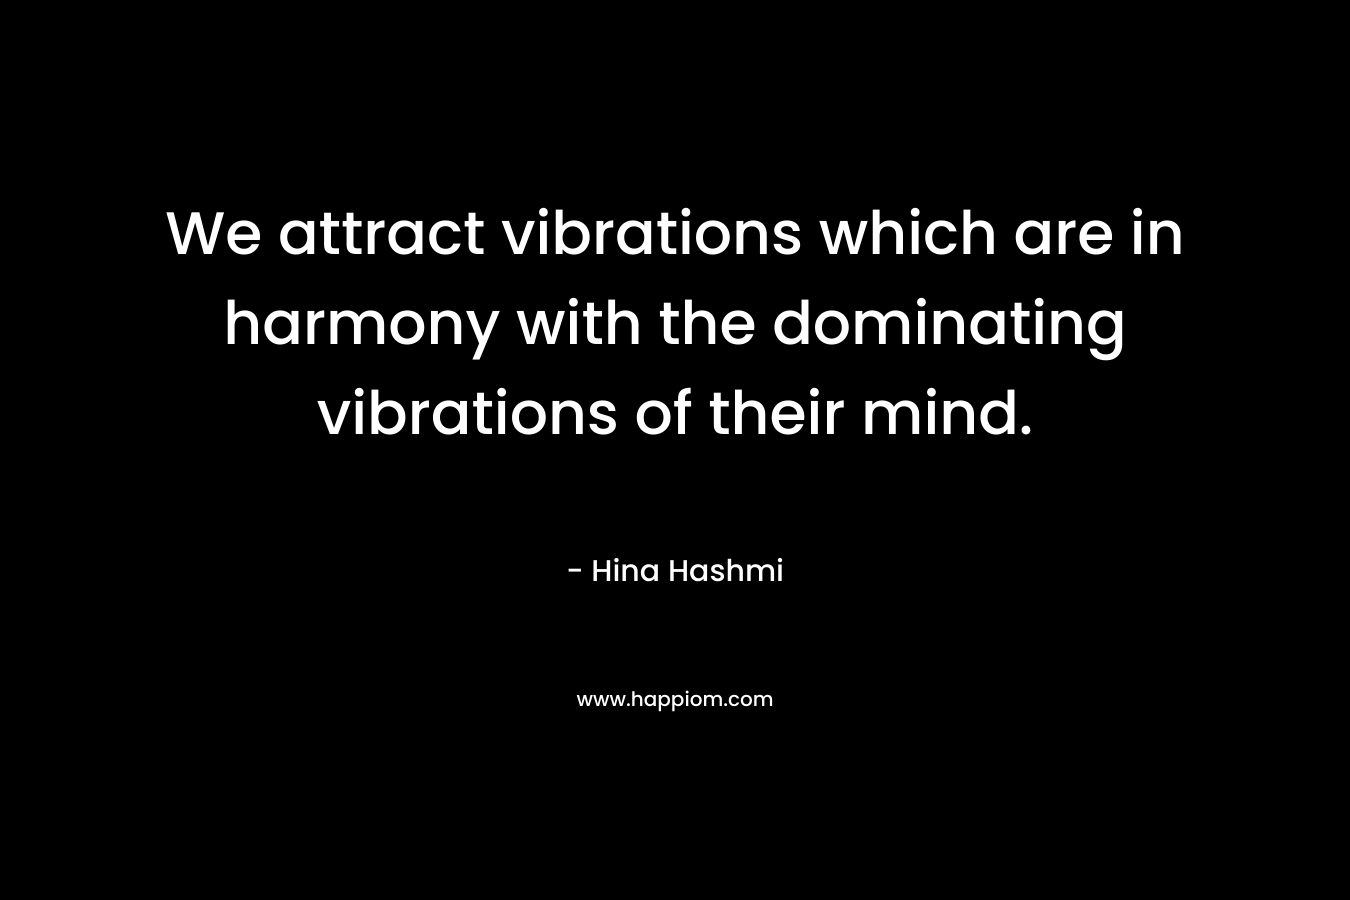 We attract vibrations which are in harmony with the dominating vibrations of their mind.